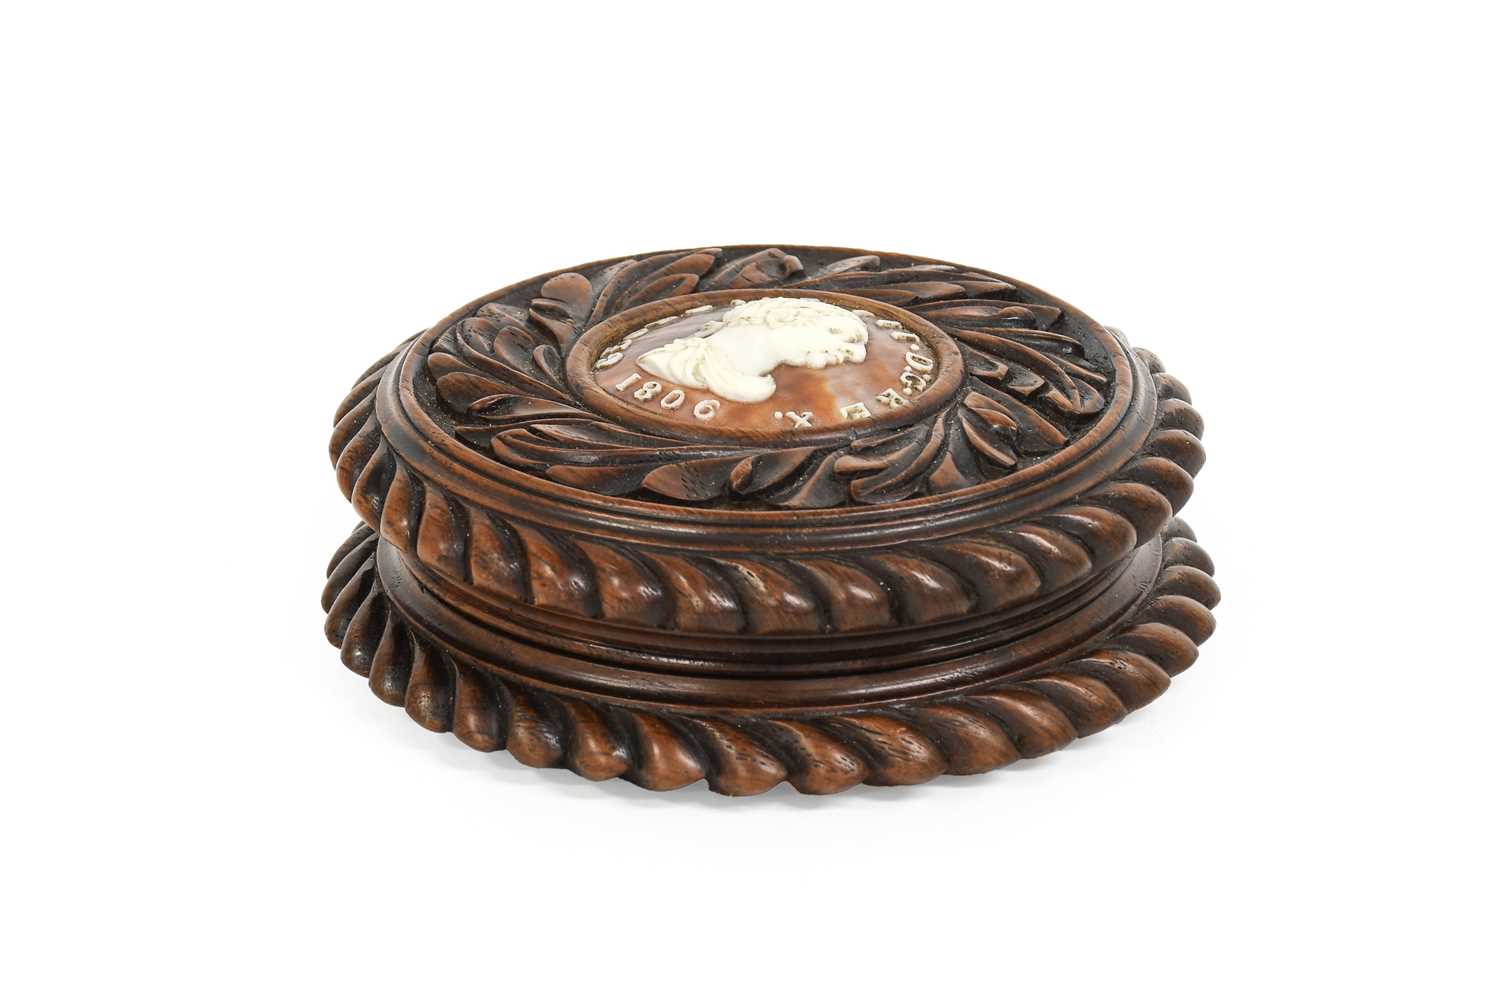 A George III Commemorative Walnut Snuffbox and Cover, dated 1806, of circular form, the cover set